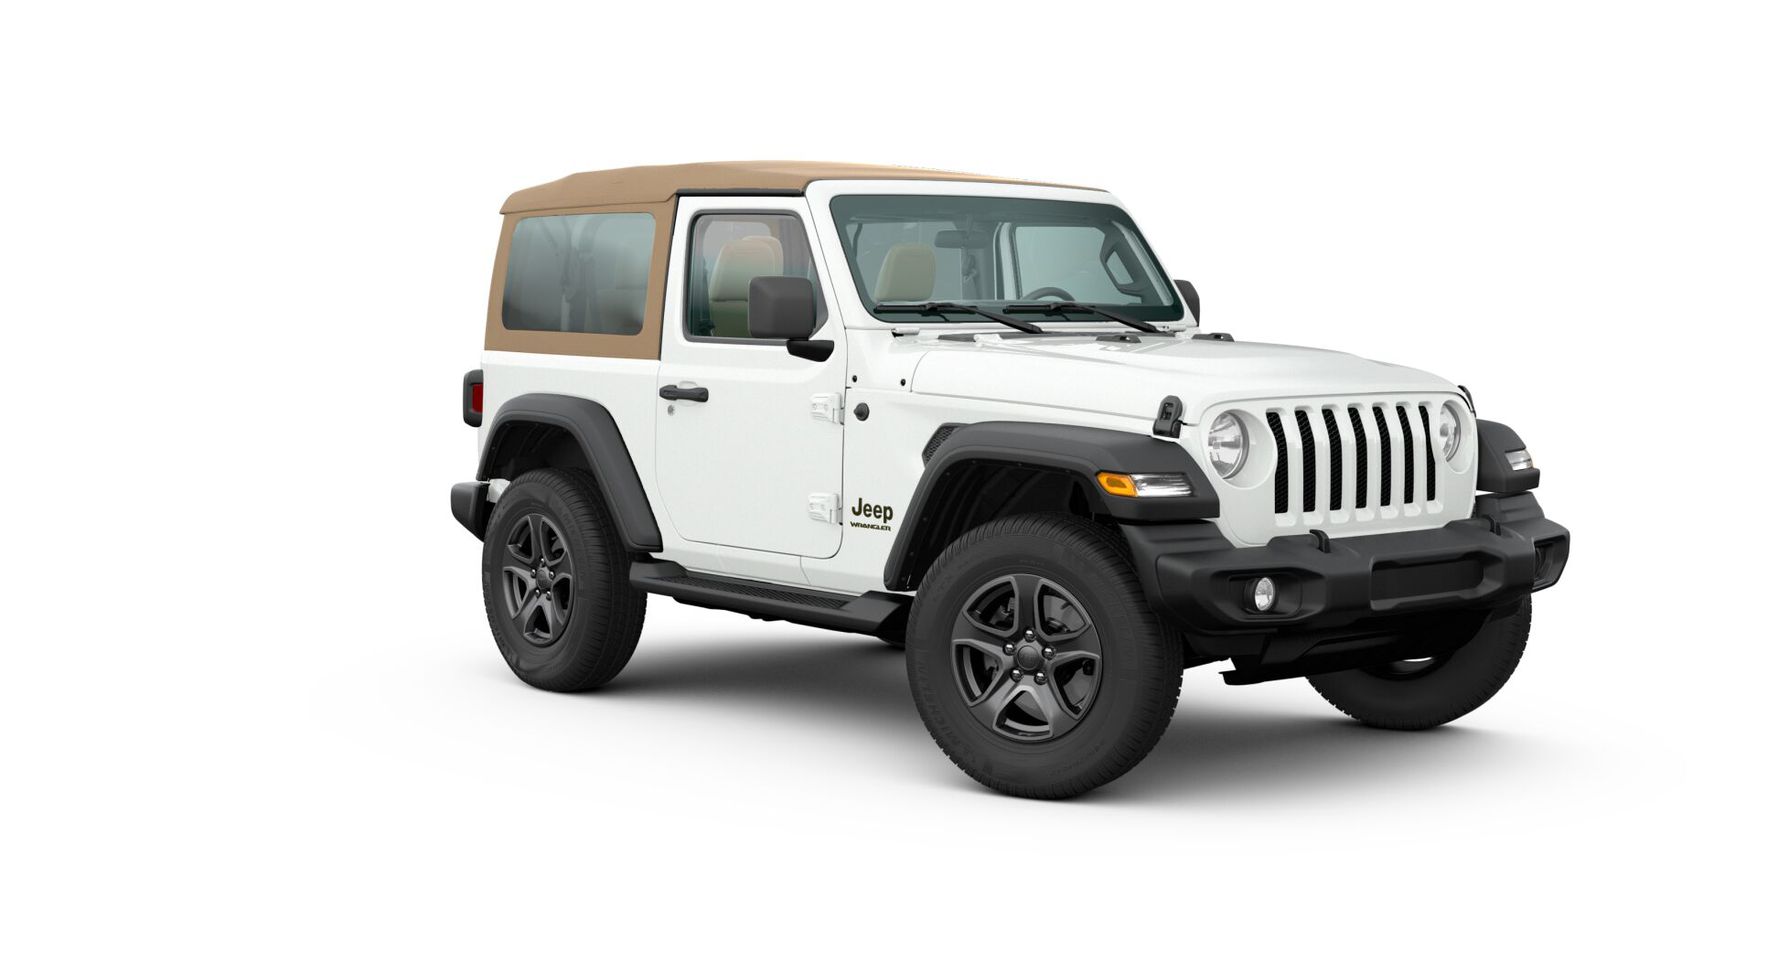 Jeep Wrangler Black and Tan (двухдверная кабина) 2020